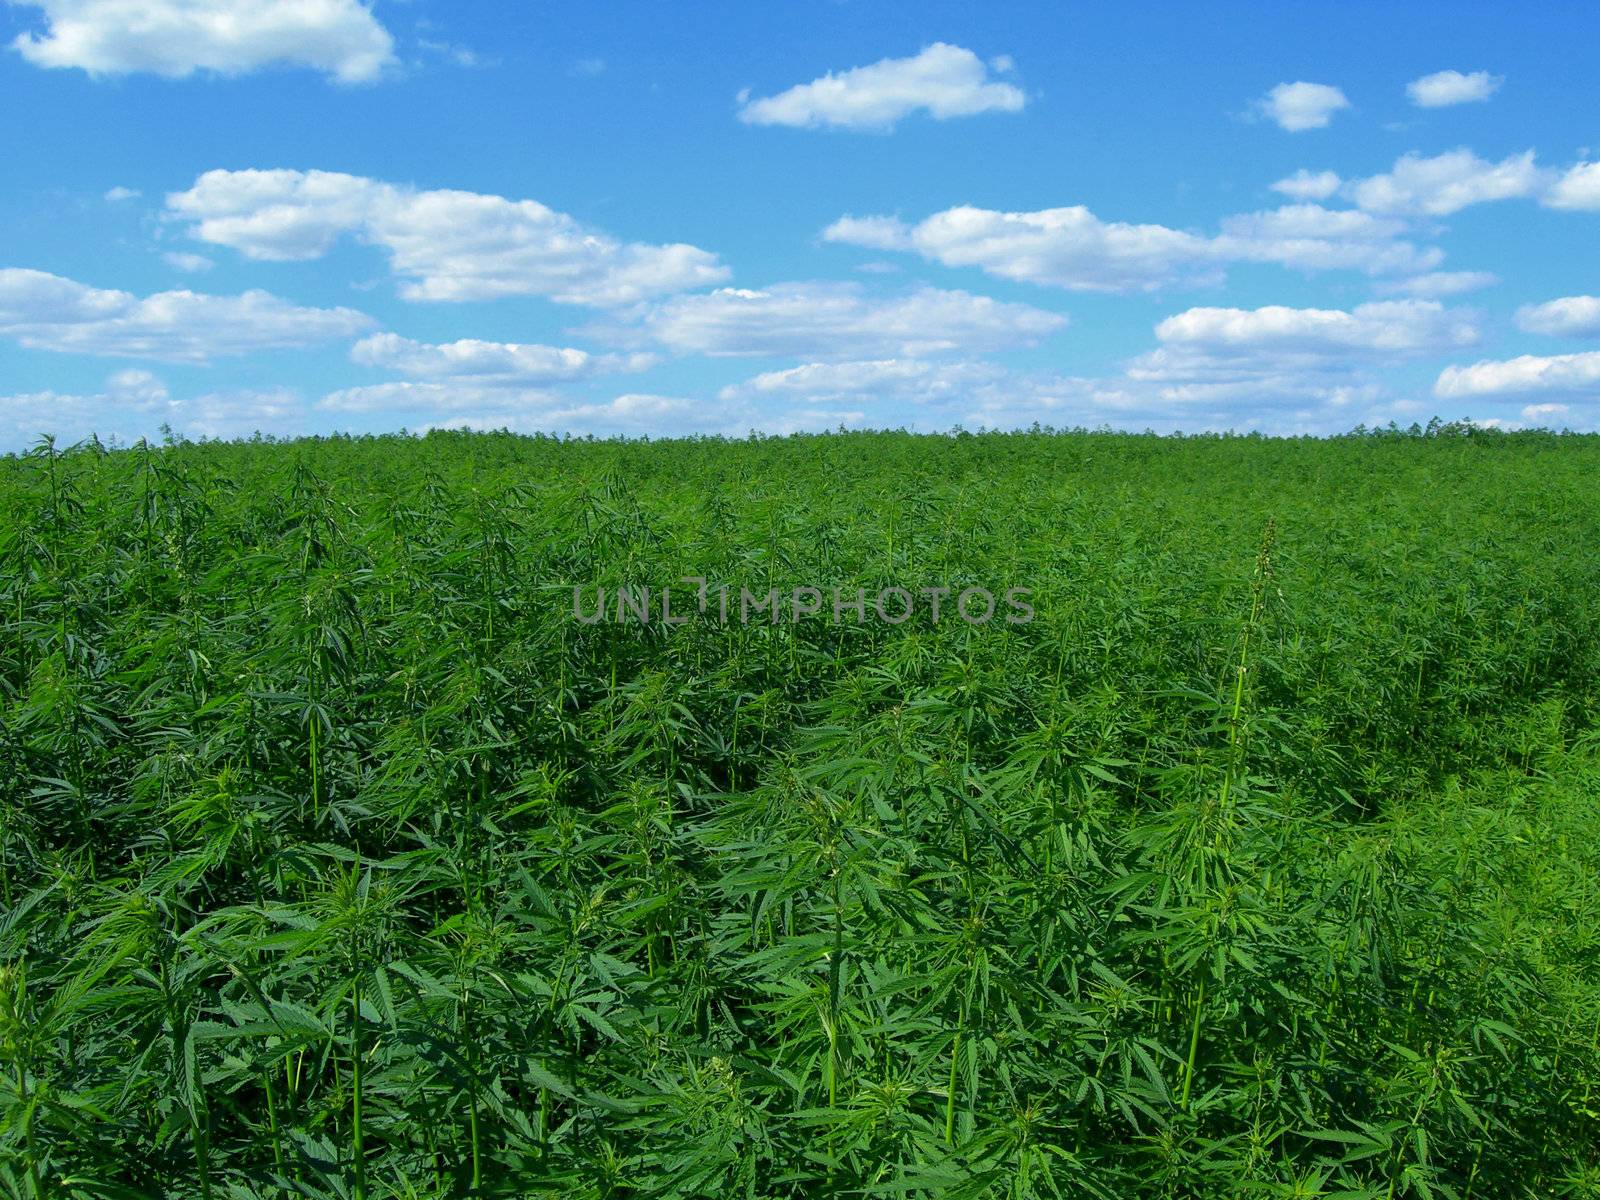    Field of hemp. Industrial kind of this plant is not a drug but a resource. It contains hardly any THC